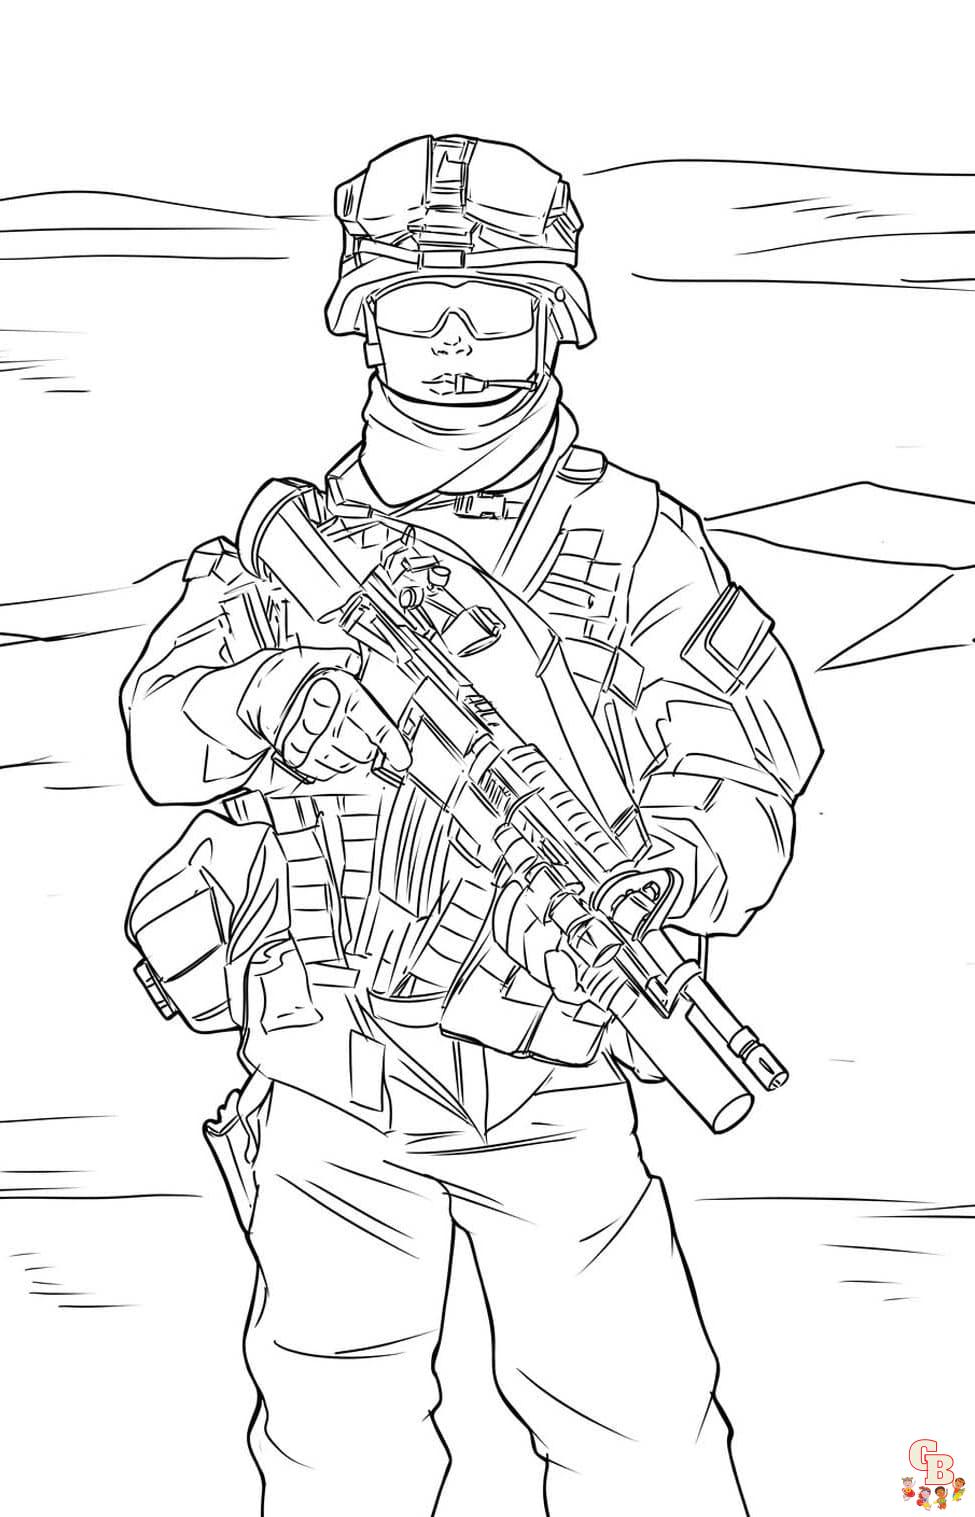 SWAT coloring pages free